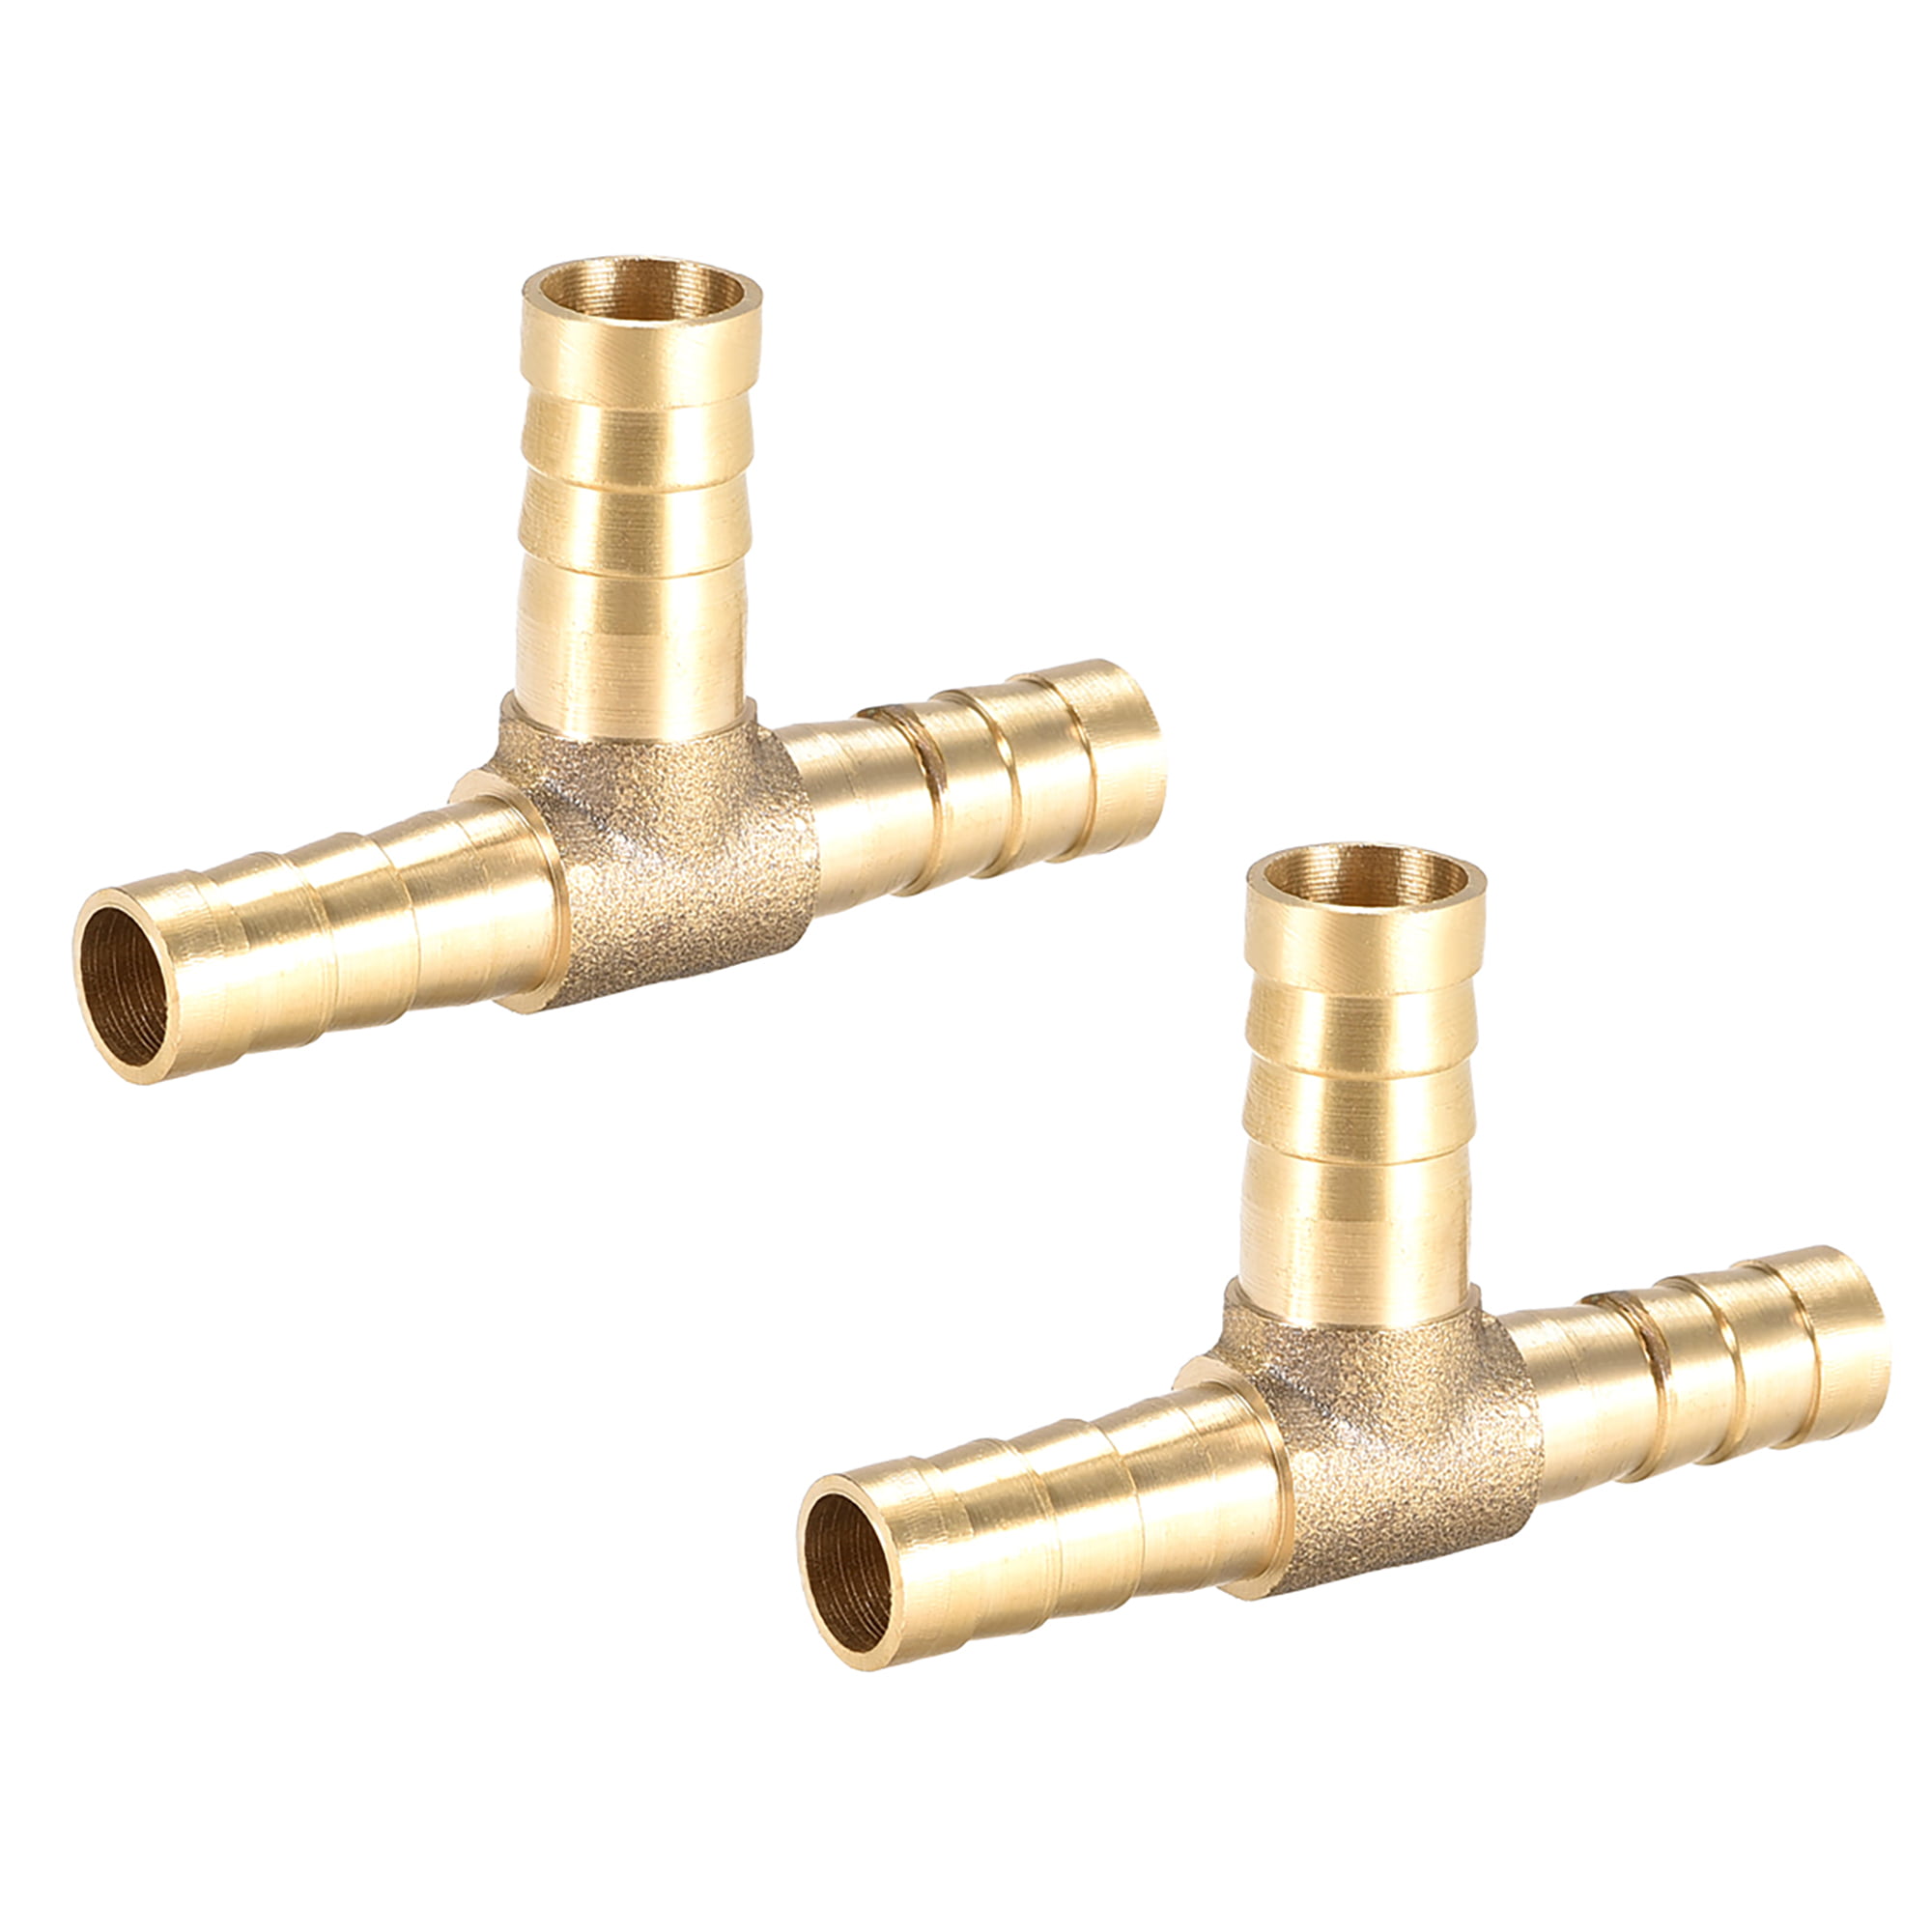 UK 19mm Hose ID 4 Way Cross Brass Barb Tail Pipe Connector Fitting Water Air 